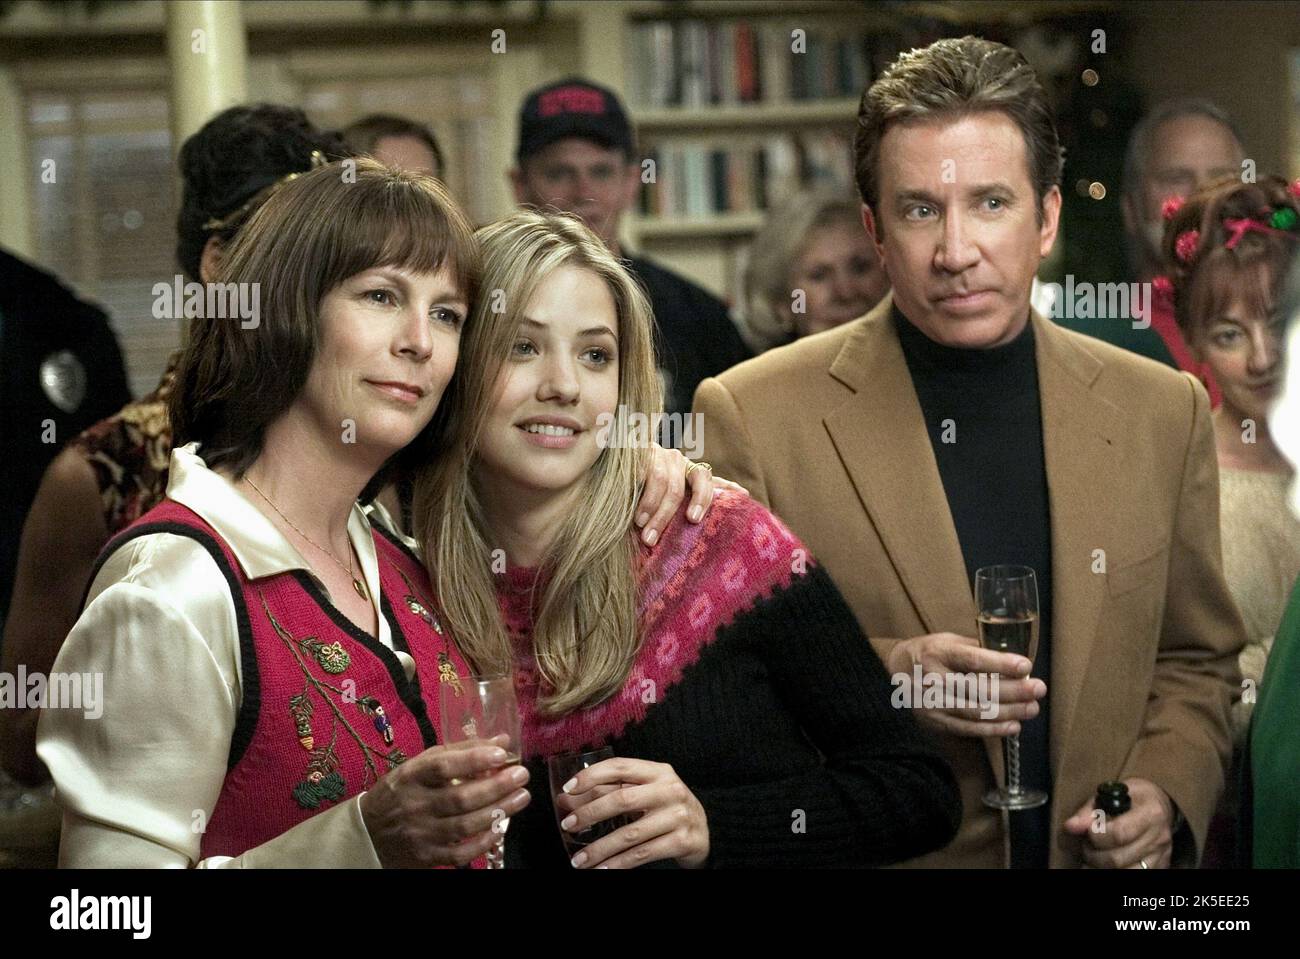 JAMIE LEE CURTIS, JULIE GONZALO, TIM ALLEN, CHRISTMAS WITH THE KRANKS, 2004 Stock Photo